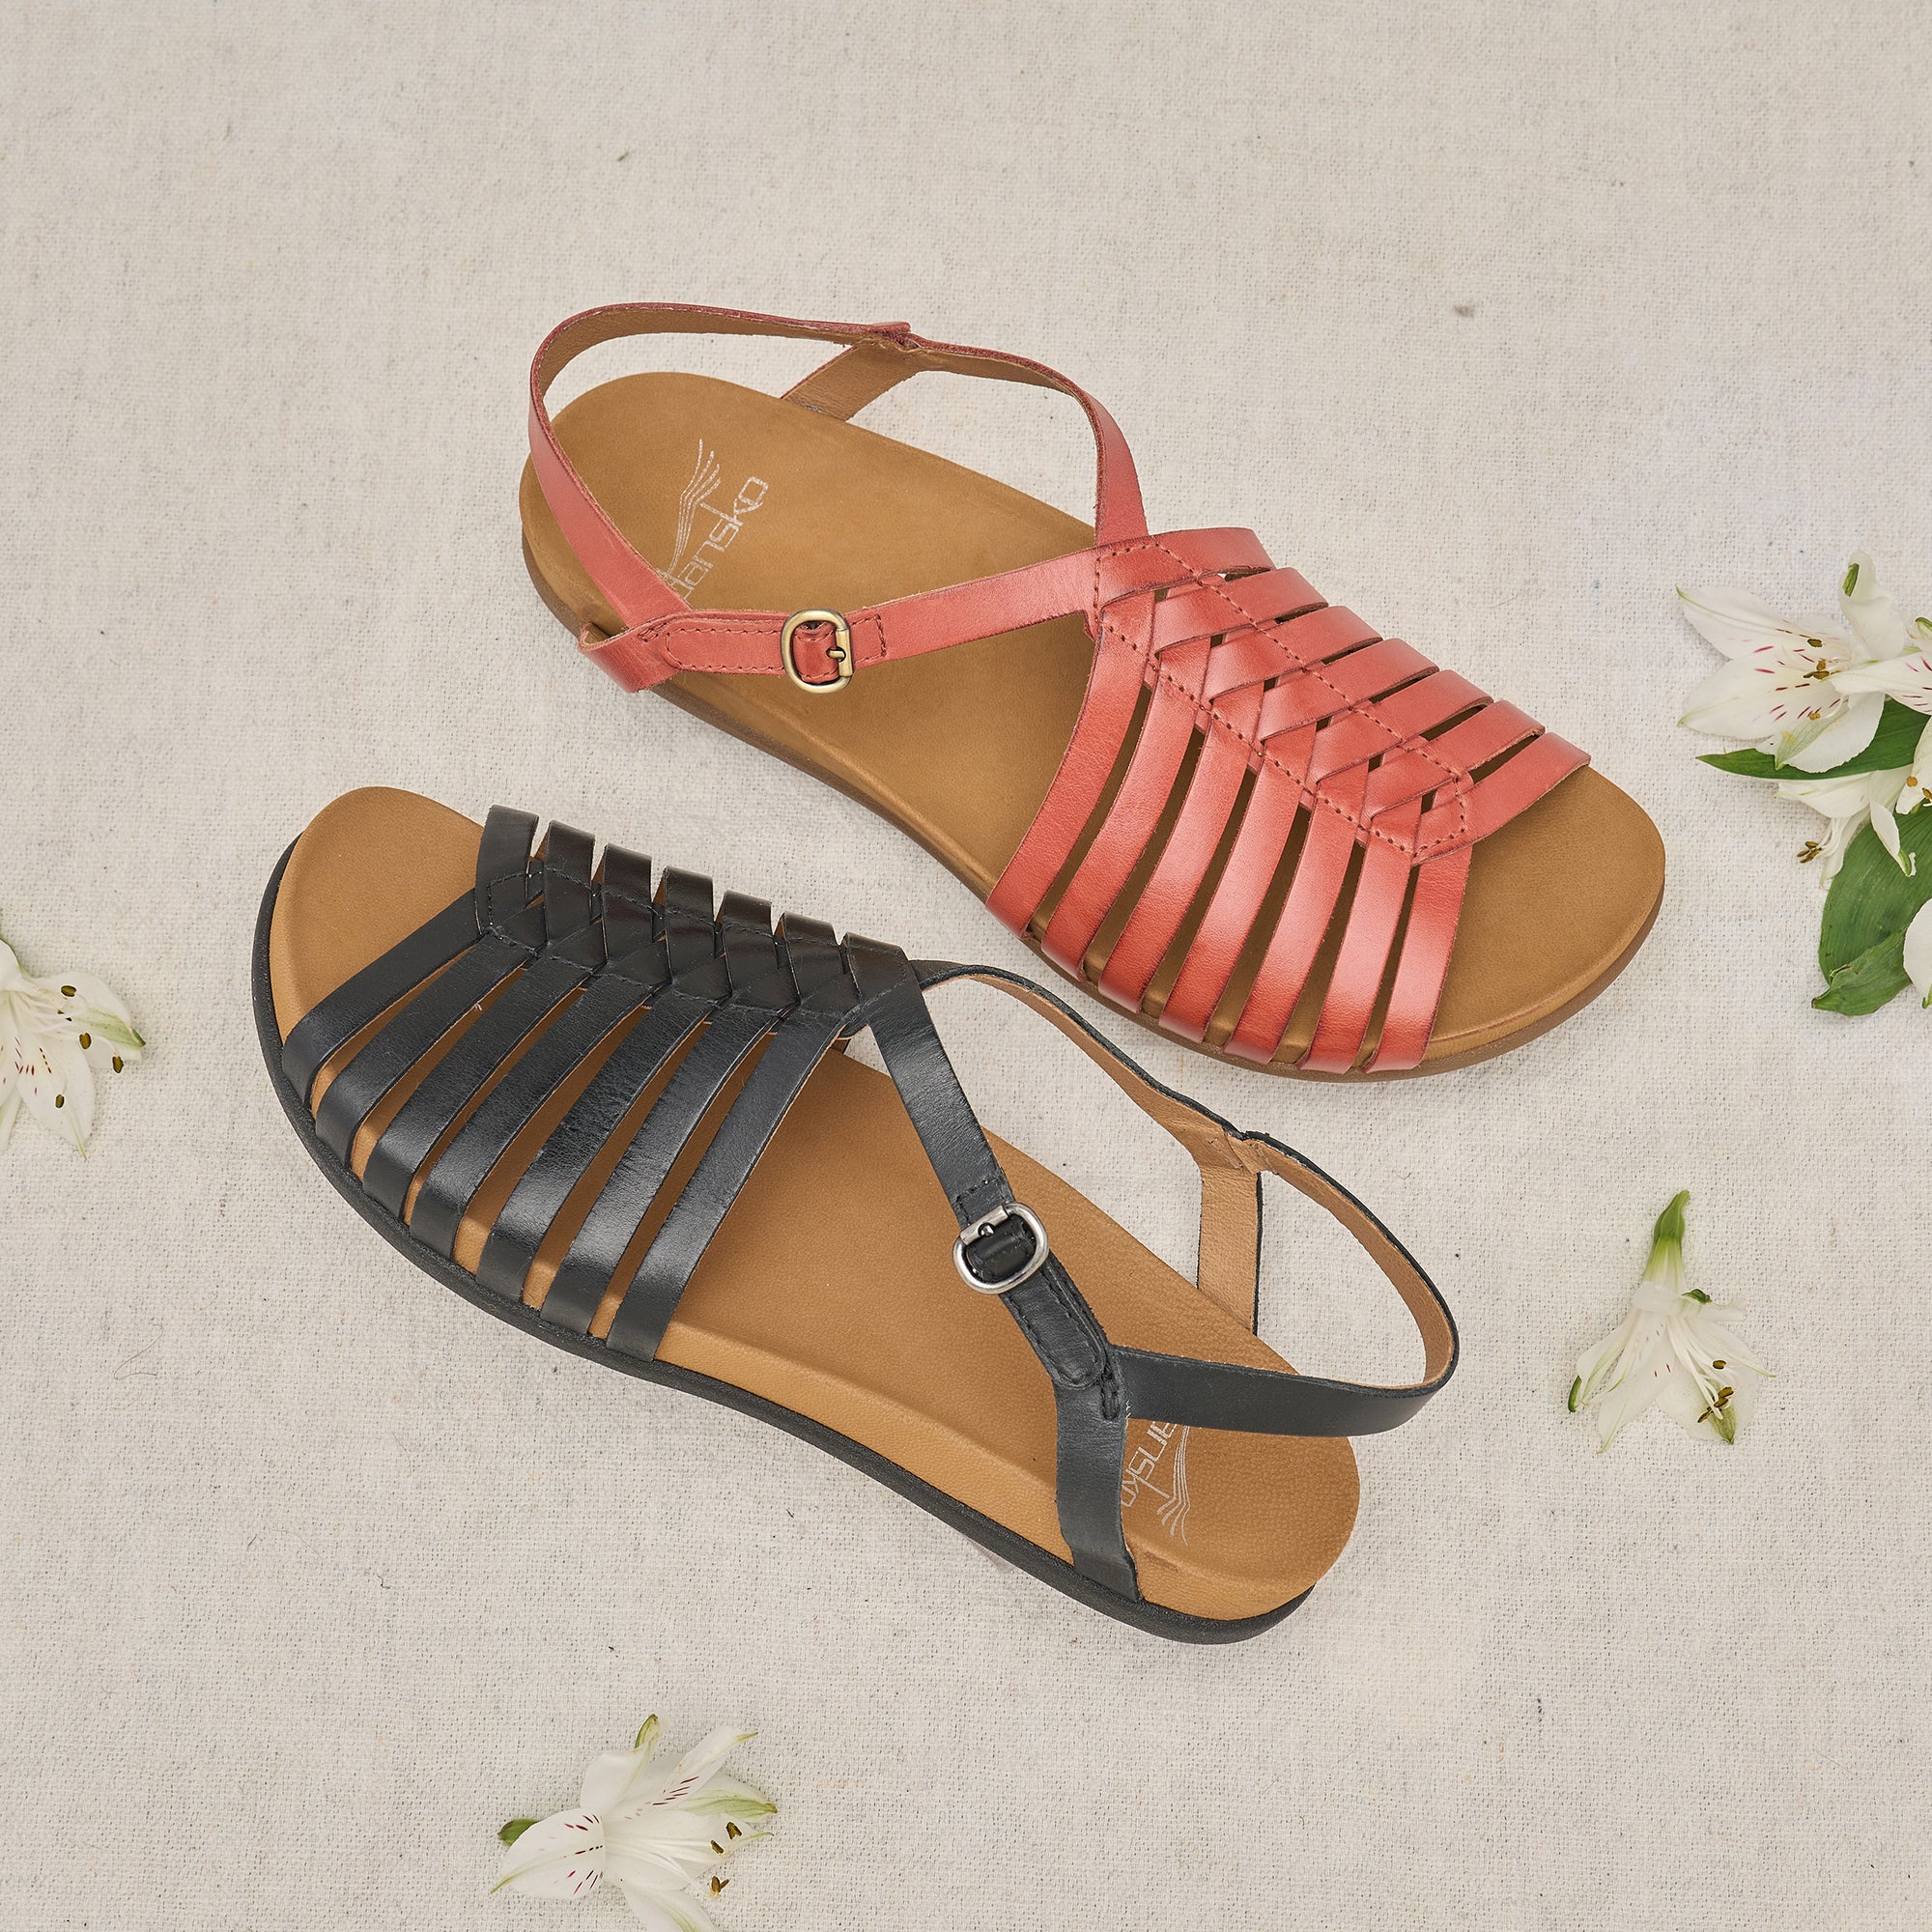 Two different colors of a flat fisherman sandal.